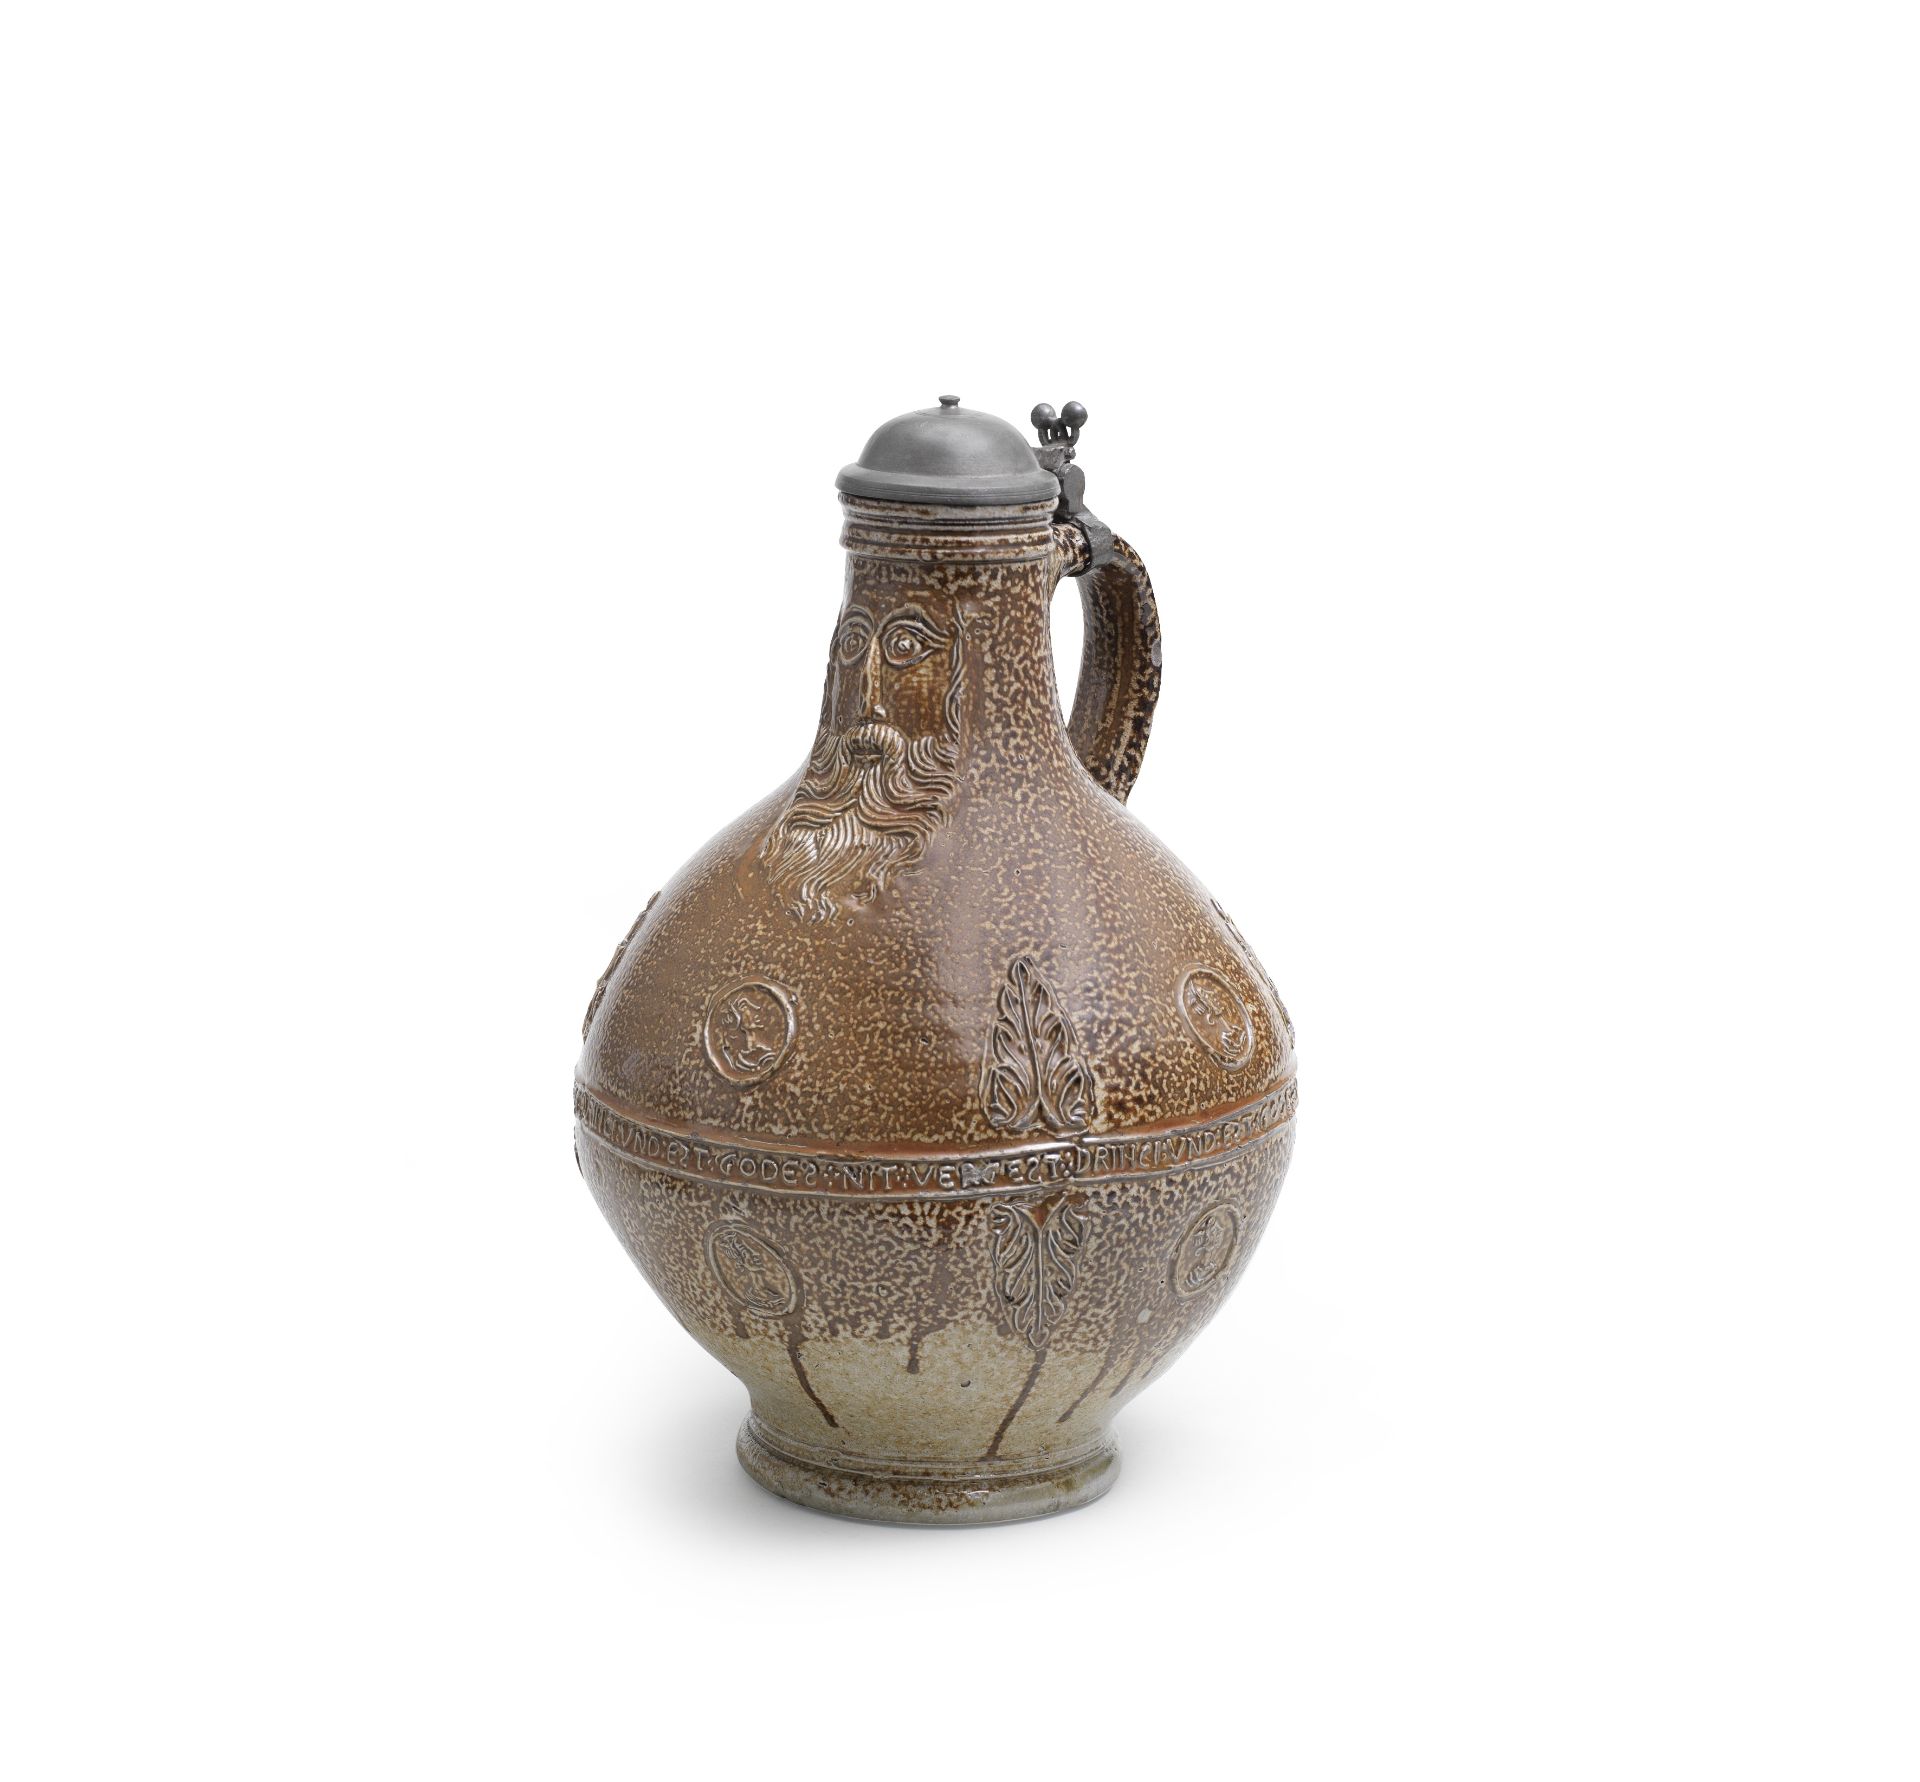 A large Cologne/Frechen stoneware pewter-mounted jug (Bartmannskrug), late 16th century